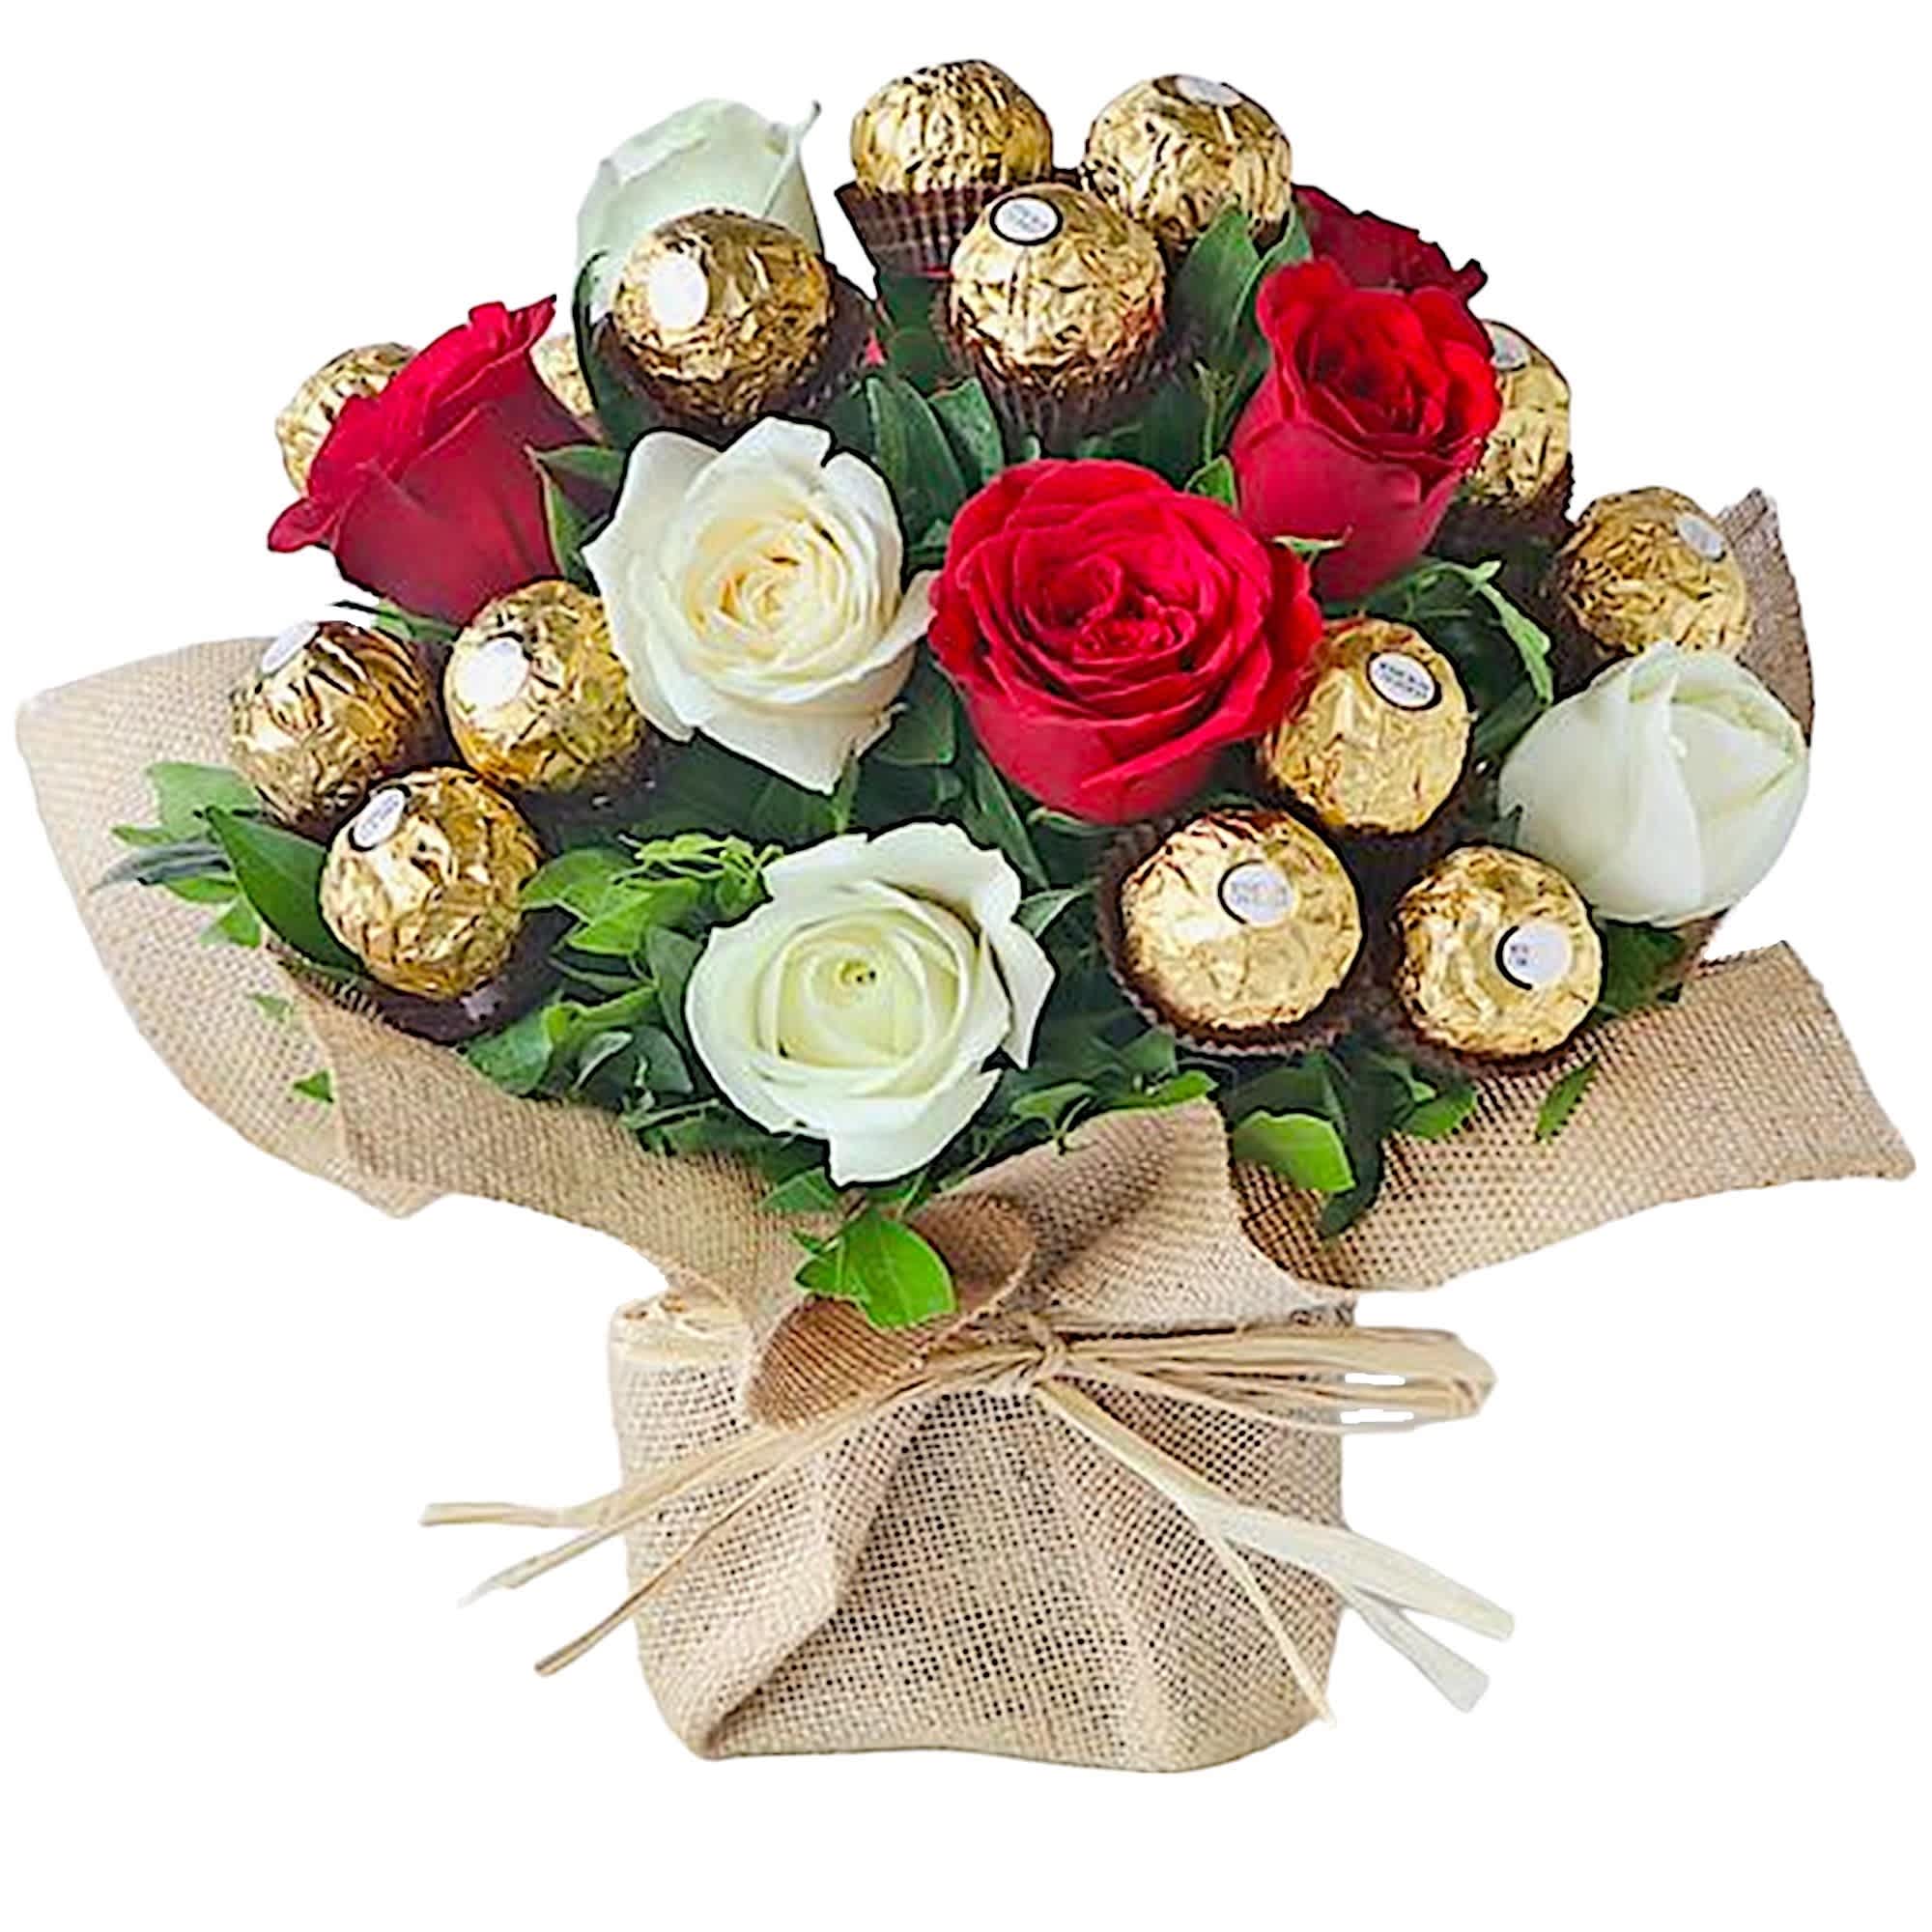 A Sweet Treat Rose Arrangement  - A modern flower arrangement filled with roses and chocolates. • Picked fresh from farms around the world, our flowers are cared for every step of the way and delivered fresh to ensure lasting beauty and enjoyment.  DETAILS  • This arrangement includes red and ivory roses, Ferrero Rocher Chocolates and greenery, arranged in a cube wrapped with burlap. • Can be sent to the home or work.  FLORIST-TO-DOOR  Orientation: All-Around  BLOOM DETAILS Roses Greenery  • Standard - (Shown) 12 Roses and 20 Chocolates • Deluxe - 18 Roses and 20 Chocolates • Premium - 24 Roses and 20 Chocolates  Designed by our award-winning florist designers.  HOW TO CARE FOR YOUR FLOWERS 1. Keep in a location without direct sunlight and away from extreme heat or cold. 2. Add water regularly to keep floral foam moist and mix in the flower food packet provided. 3. Trim the stems every other day 4. As flowers/foliage wilt, remove &amp; discard  Please Note: The arrangement pictured reflects an original design for this product. While we always do our best to follow the original flower recipe, the exact flower or container is sometimes unavailable. We may replace items of equal or greater value to deliver the freshest flowers possible while keeping the style &amp; color palette. We assure you that we will create a beautiful, fresh flower arrangement with only the best quality flowers to keep you as a loyal customer.  How to place an order? We have several options. 1. You can place an order directly on this secure website. 2. You can call in your order by dialing: (323) 262 - 9238 3. You can visit our store (appointment recommended 323.262.9238)  NINFA'S FLOWERS 2405 WHITTIER BLVD. LOS ANGELES, CA. 90023  ATTENTION: *Please note that on busy holidays, Valentine's Day, and Mother's Day, we cannot verify if the recipient received the flowers until the following day because our drivers don't turn in their signature delivery tablets until the following day. You can verify delivery on the website after 10:00 pm or you can call 323.262.9238 the following day after 10:00 am. Thank you for your patience and understanding.